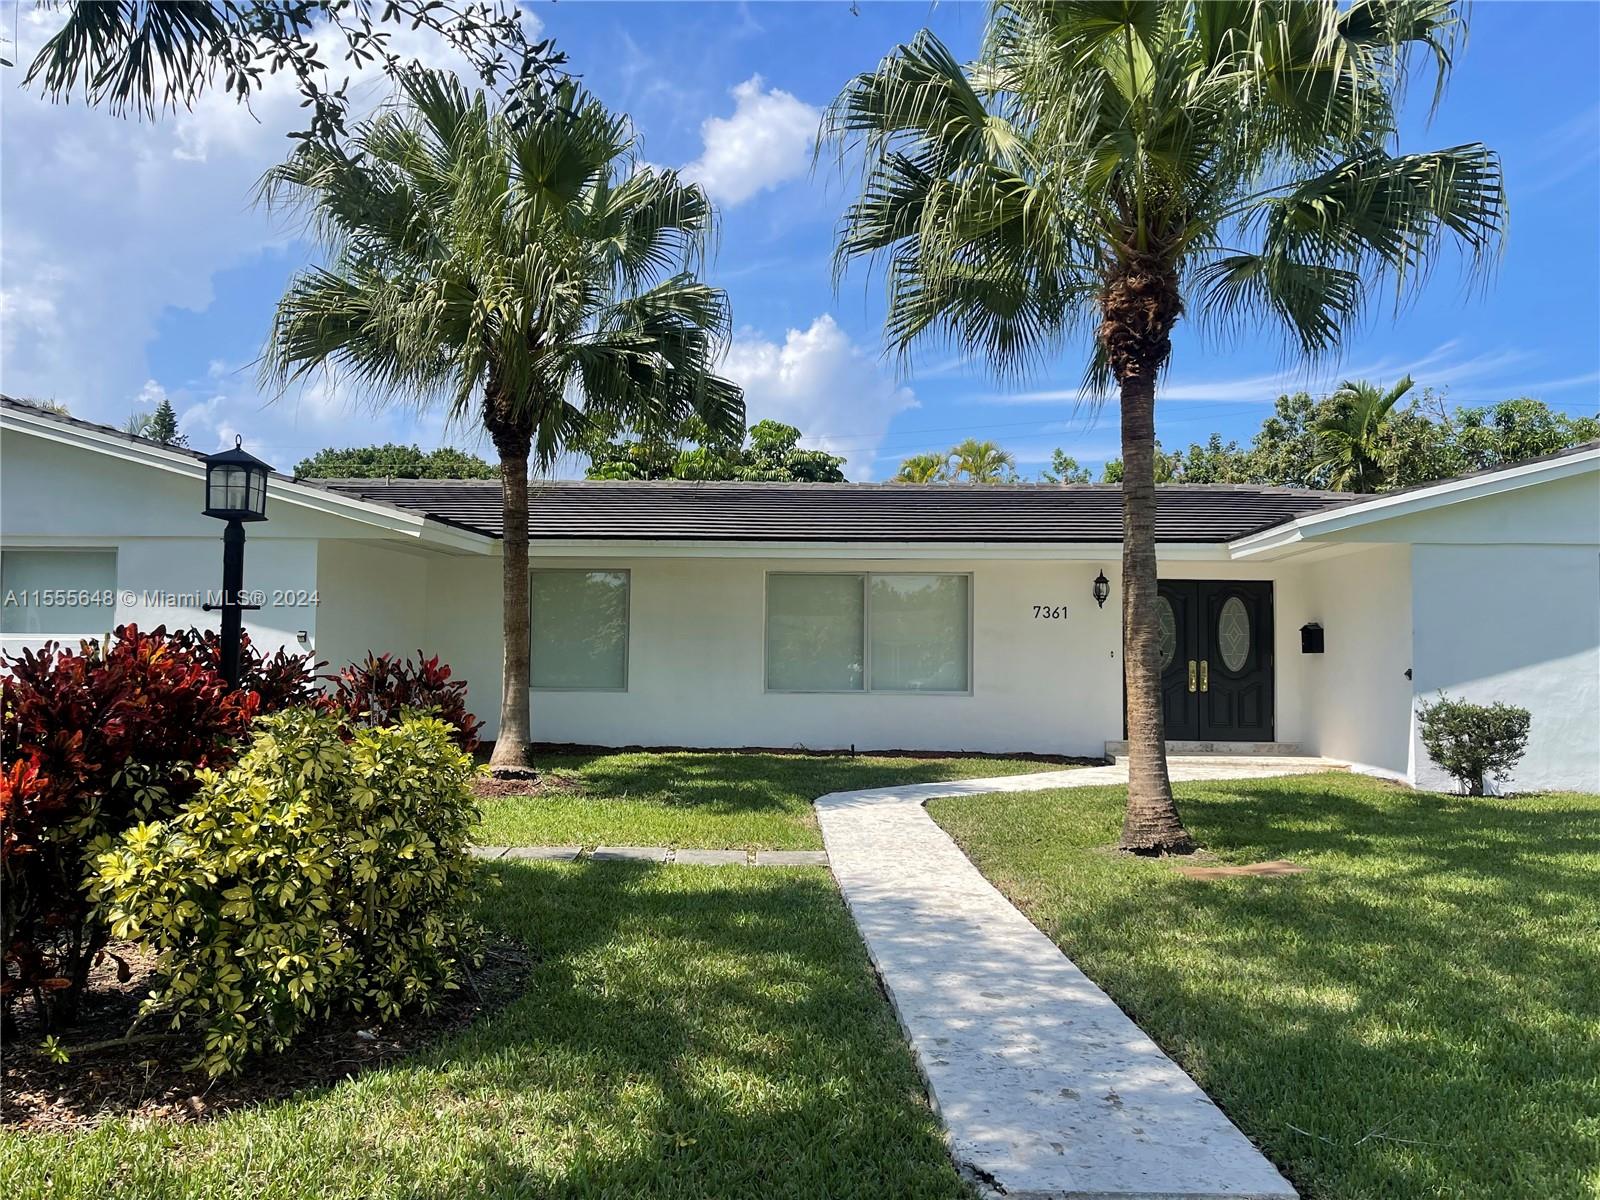 Located in quiet neighborhood in Pinecrest with A+ schools.  Updated house with impact windows and doors, tile roof, pool, built-in closets, marble floors, granite kitchen countertop and more. This house has abundant of natural light throughout the home. See broker remarks for showing instructions.